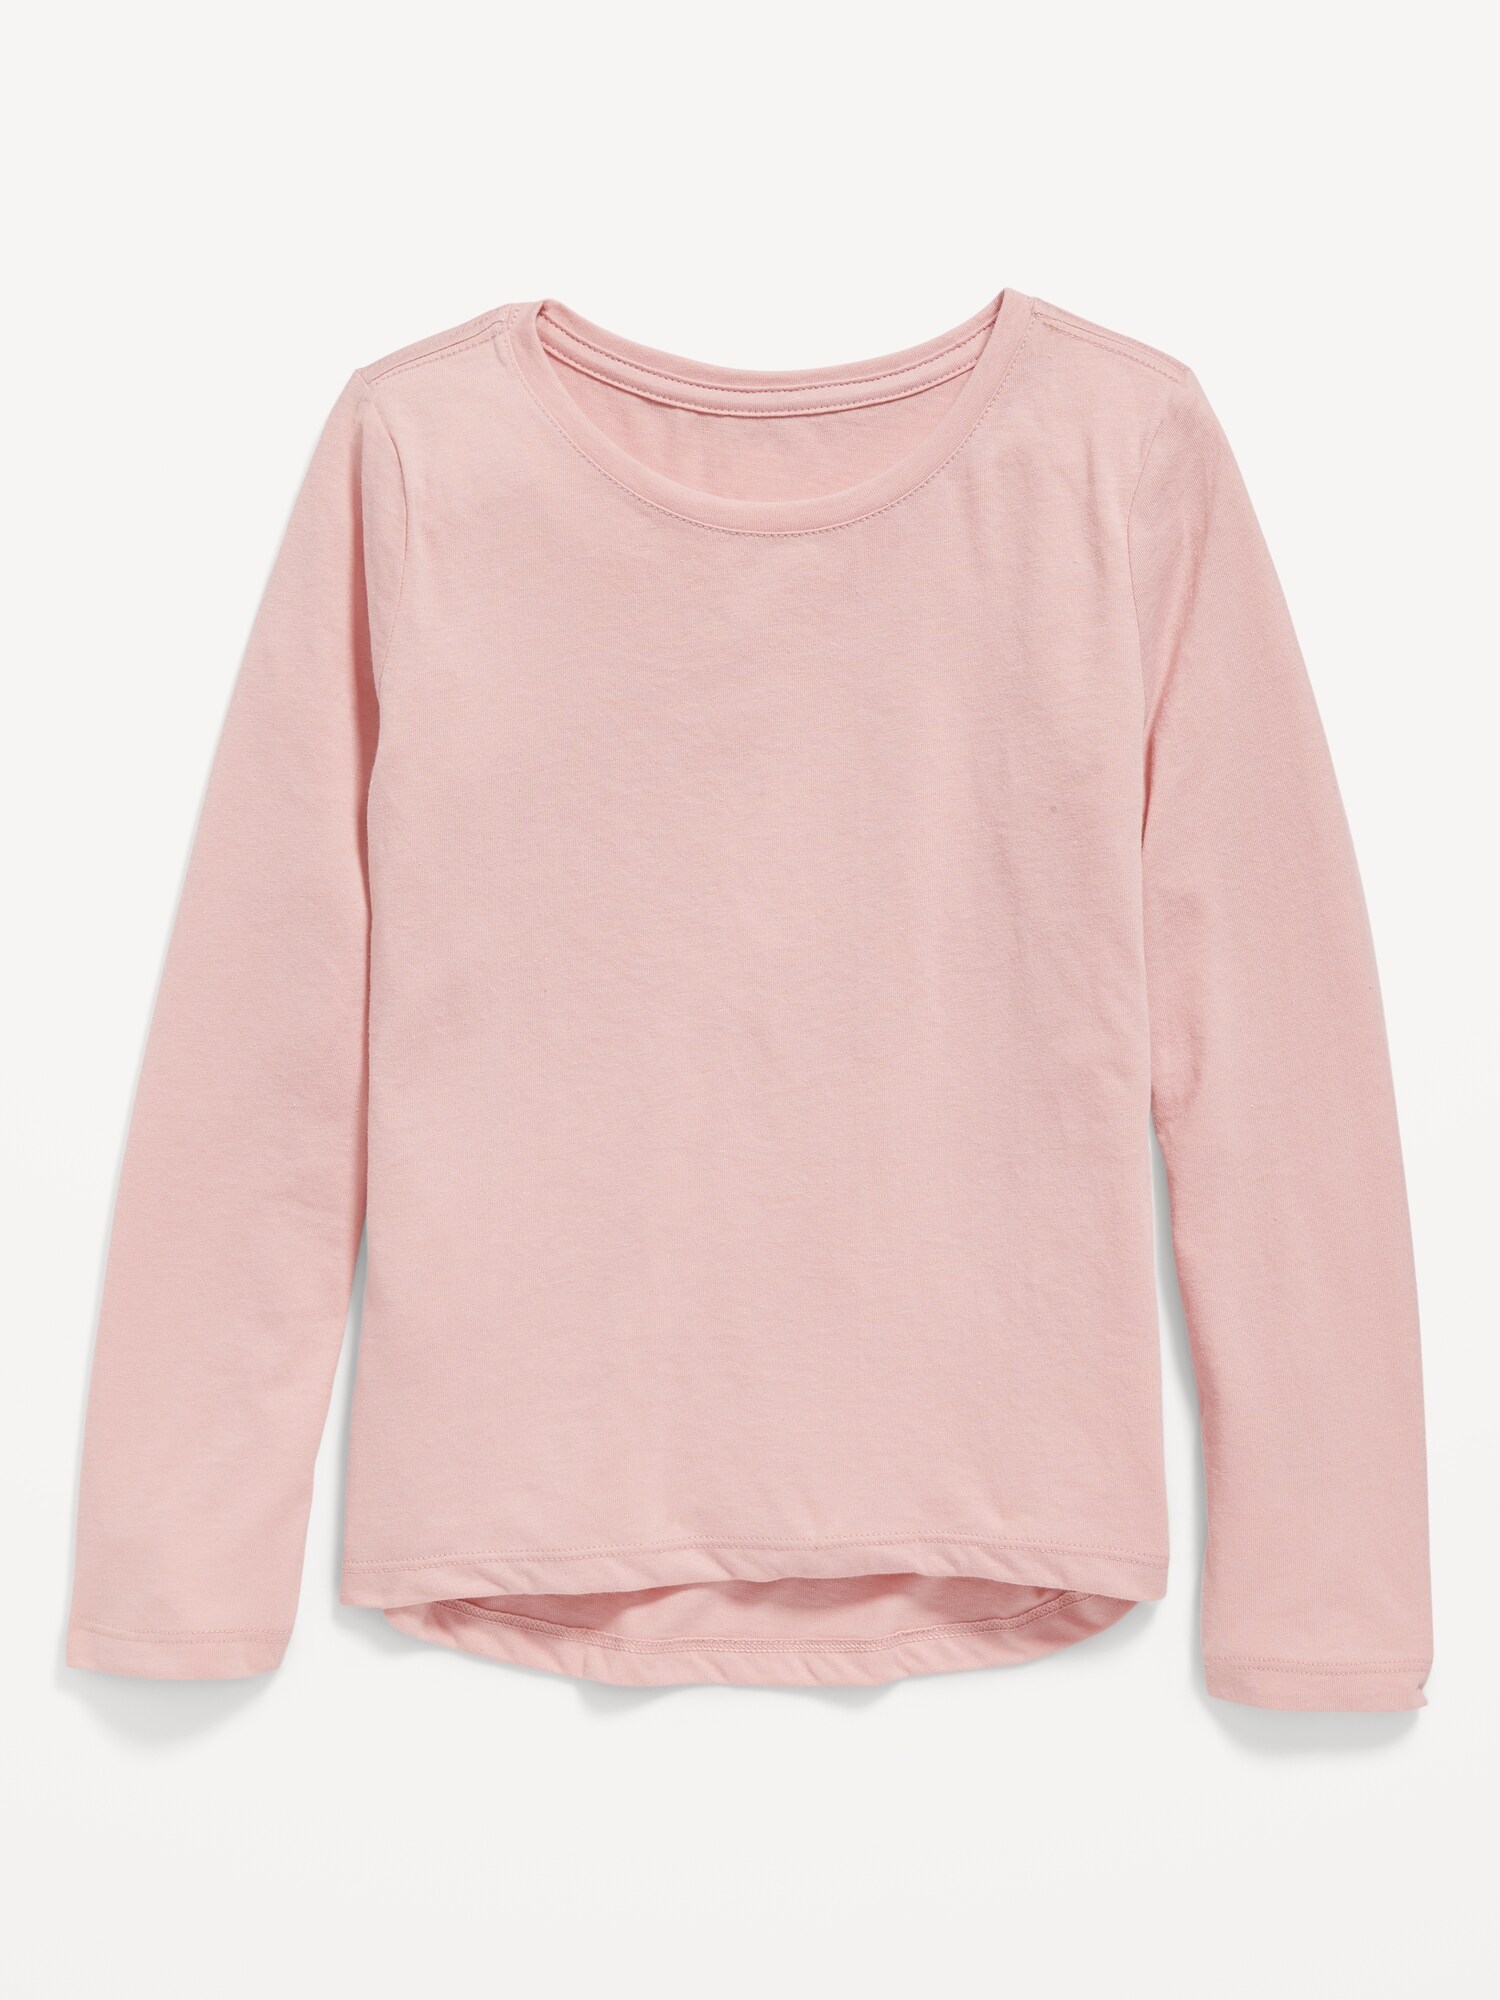 Old Navy Softest Long-Sleeve T-Shirt for Girls pink. 1